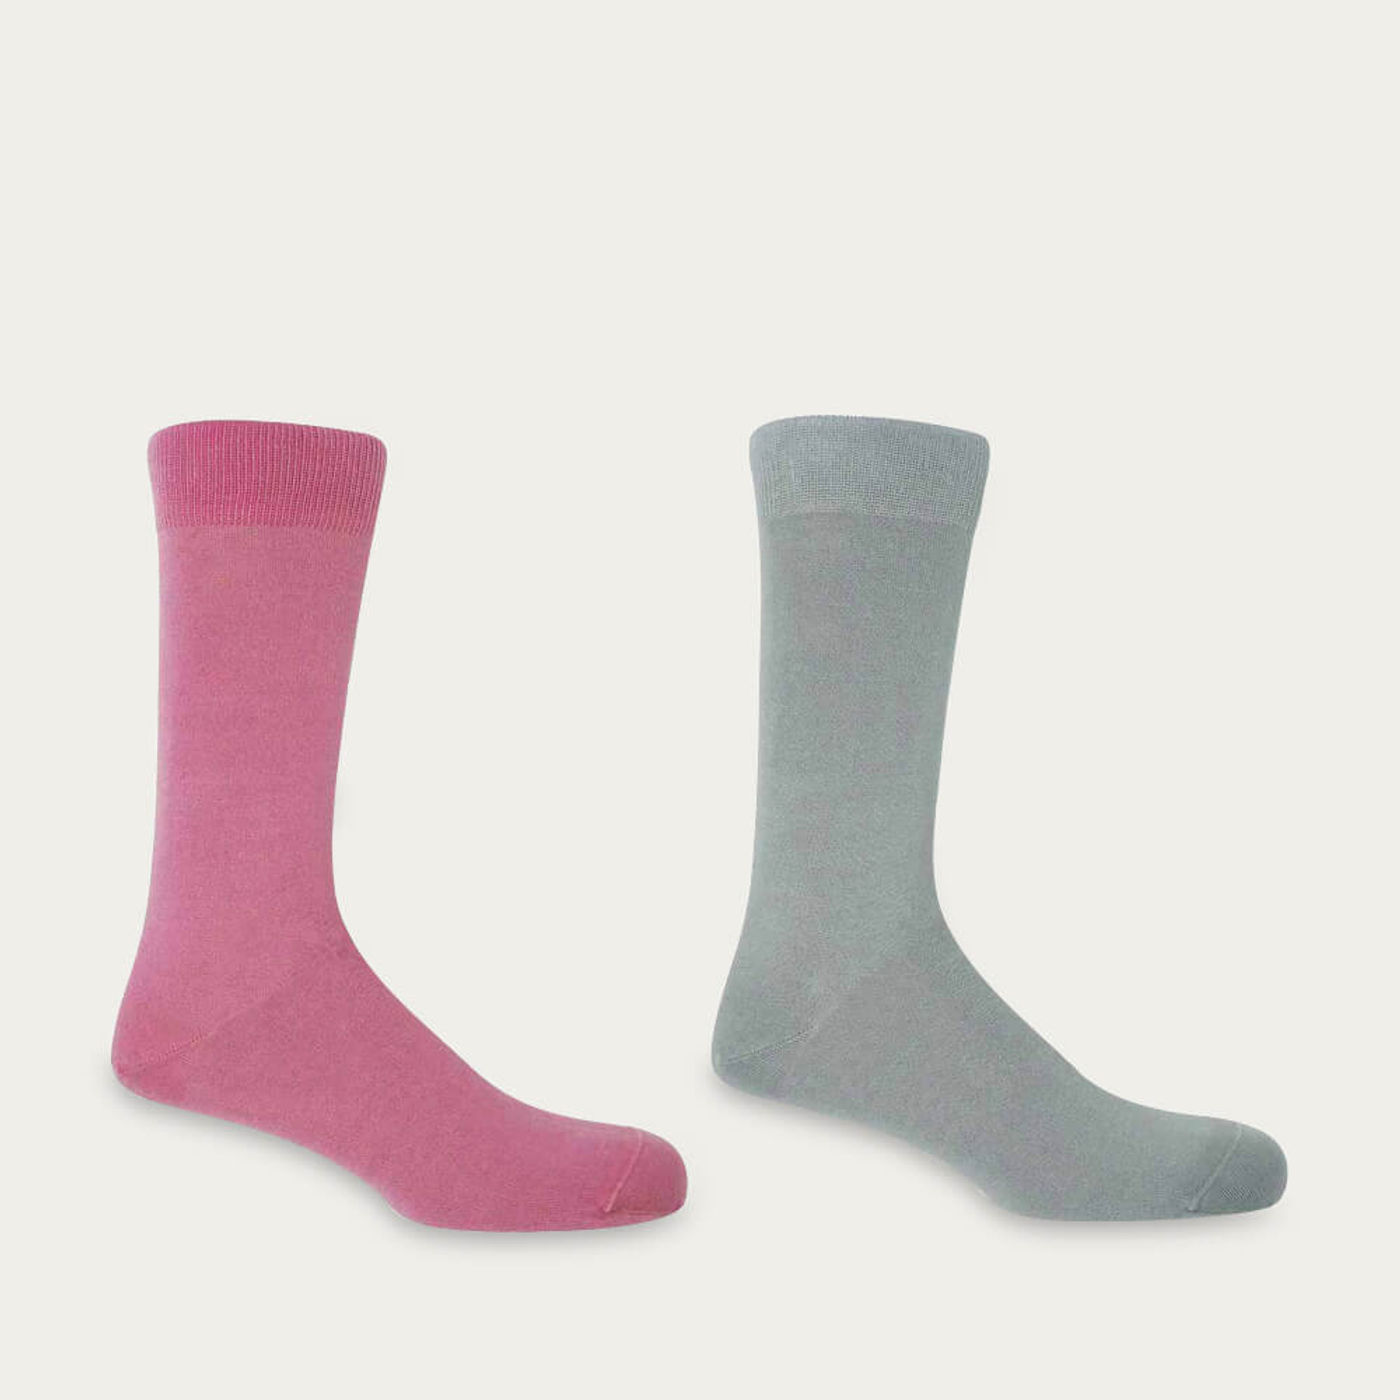 The Vibrant Pink and Grey Classic Socks | Bombinate